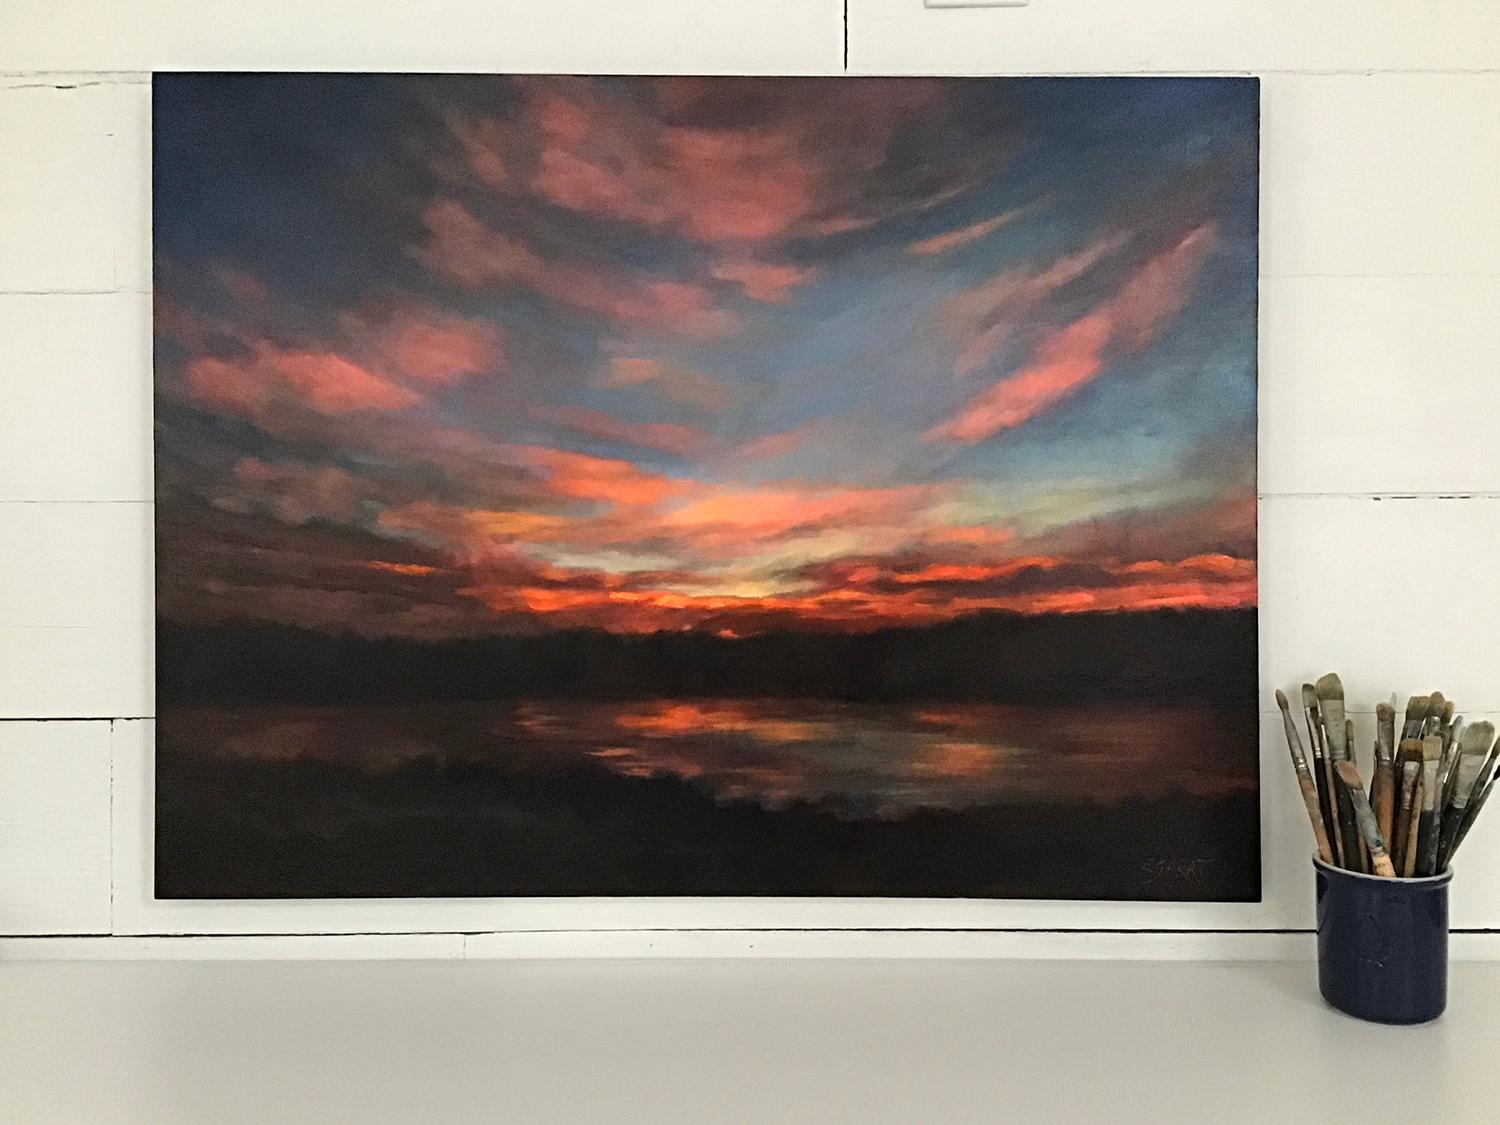 <p>Artist Comments<br>Artist Elizabeth Garat presents the last fiery rays of a sunset reflected onto the surface of the Mississippi River. The clouds glow from the remaining sunlight. She captures the majesty and power that appears to be lit from